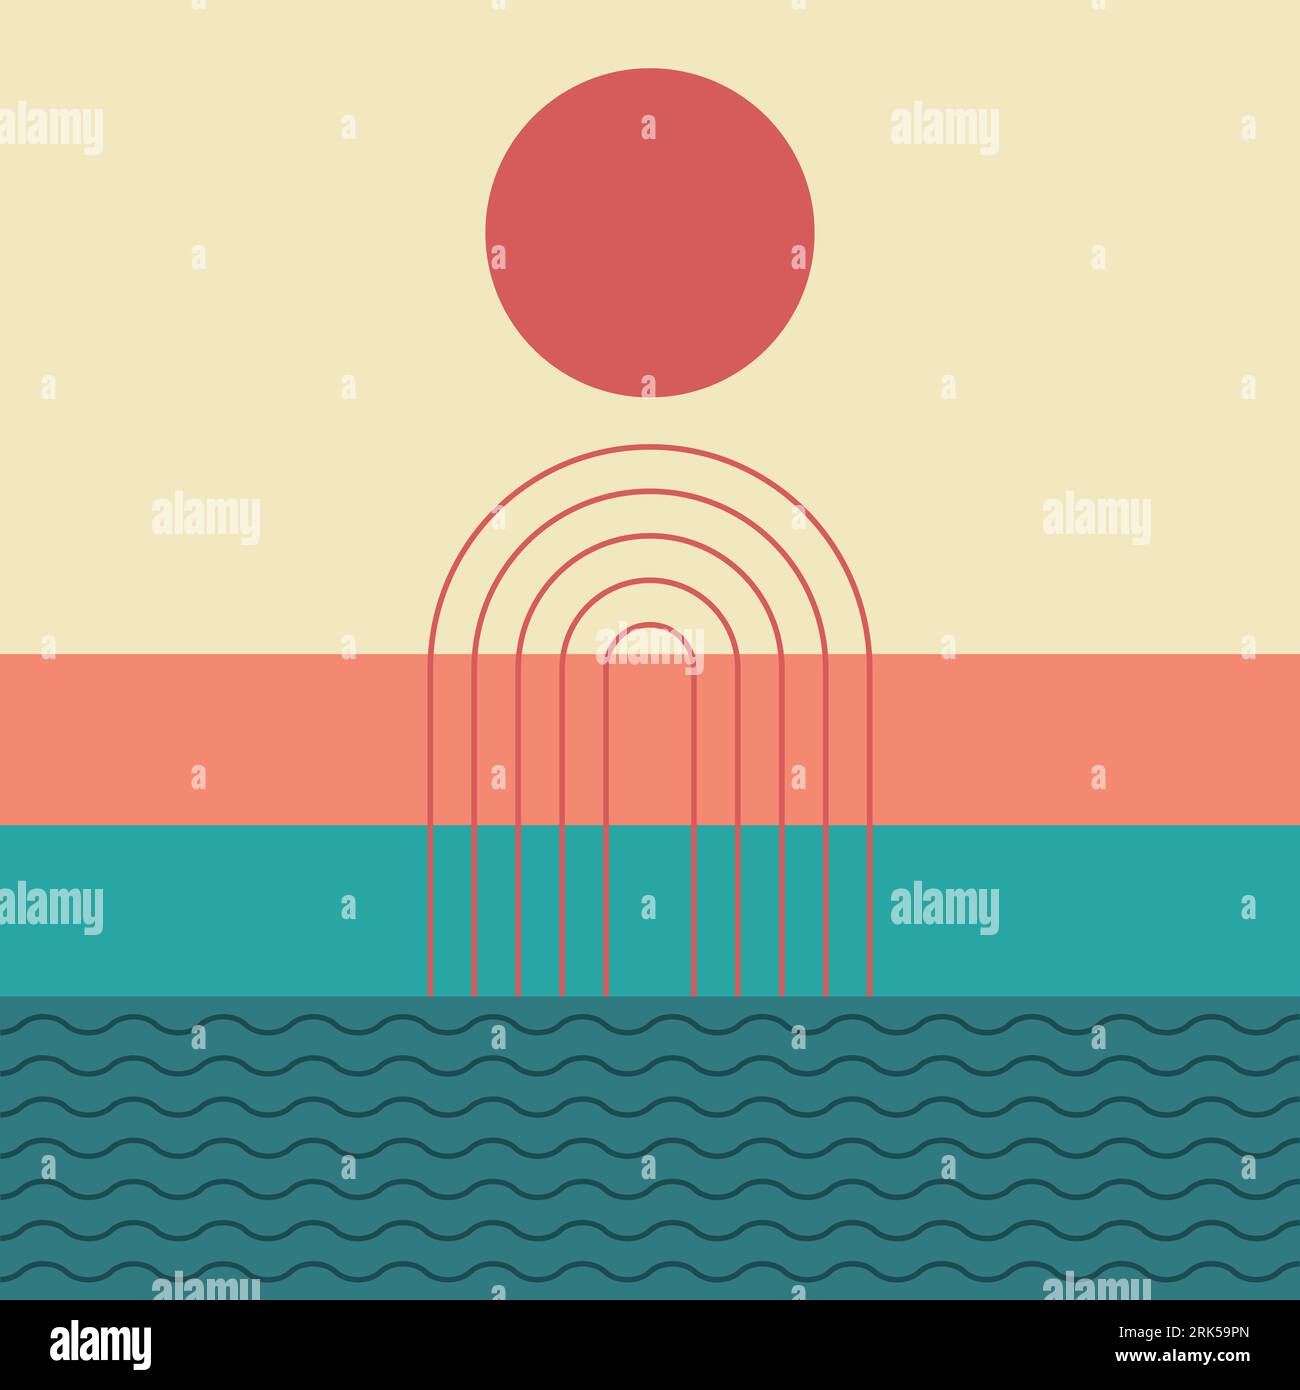 Trendy wall art design with sun and retro stripes. Bauhaus art style. Mid century decoration. Minimal nature scene with ocean. 60s 70s abstract vector Stock Vector